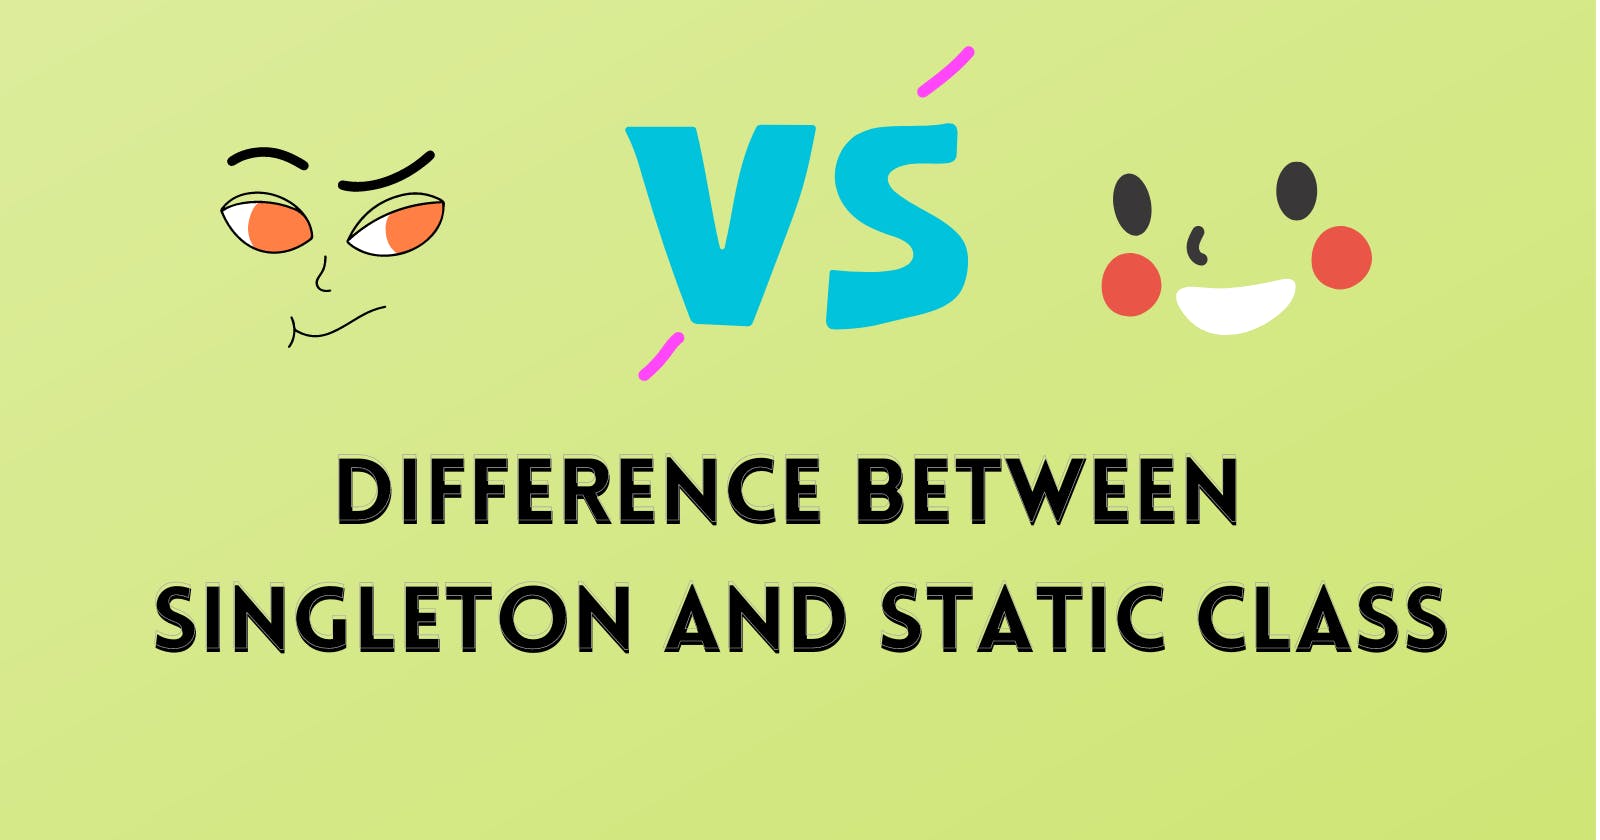 Difference Between Singleton and static class